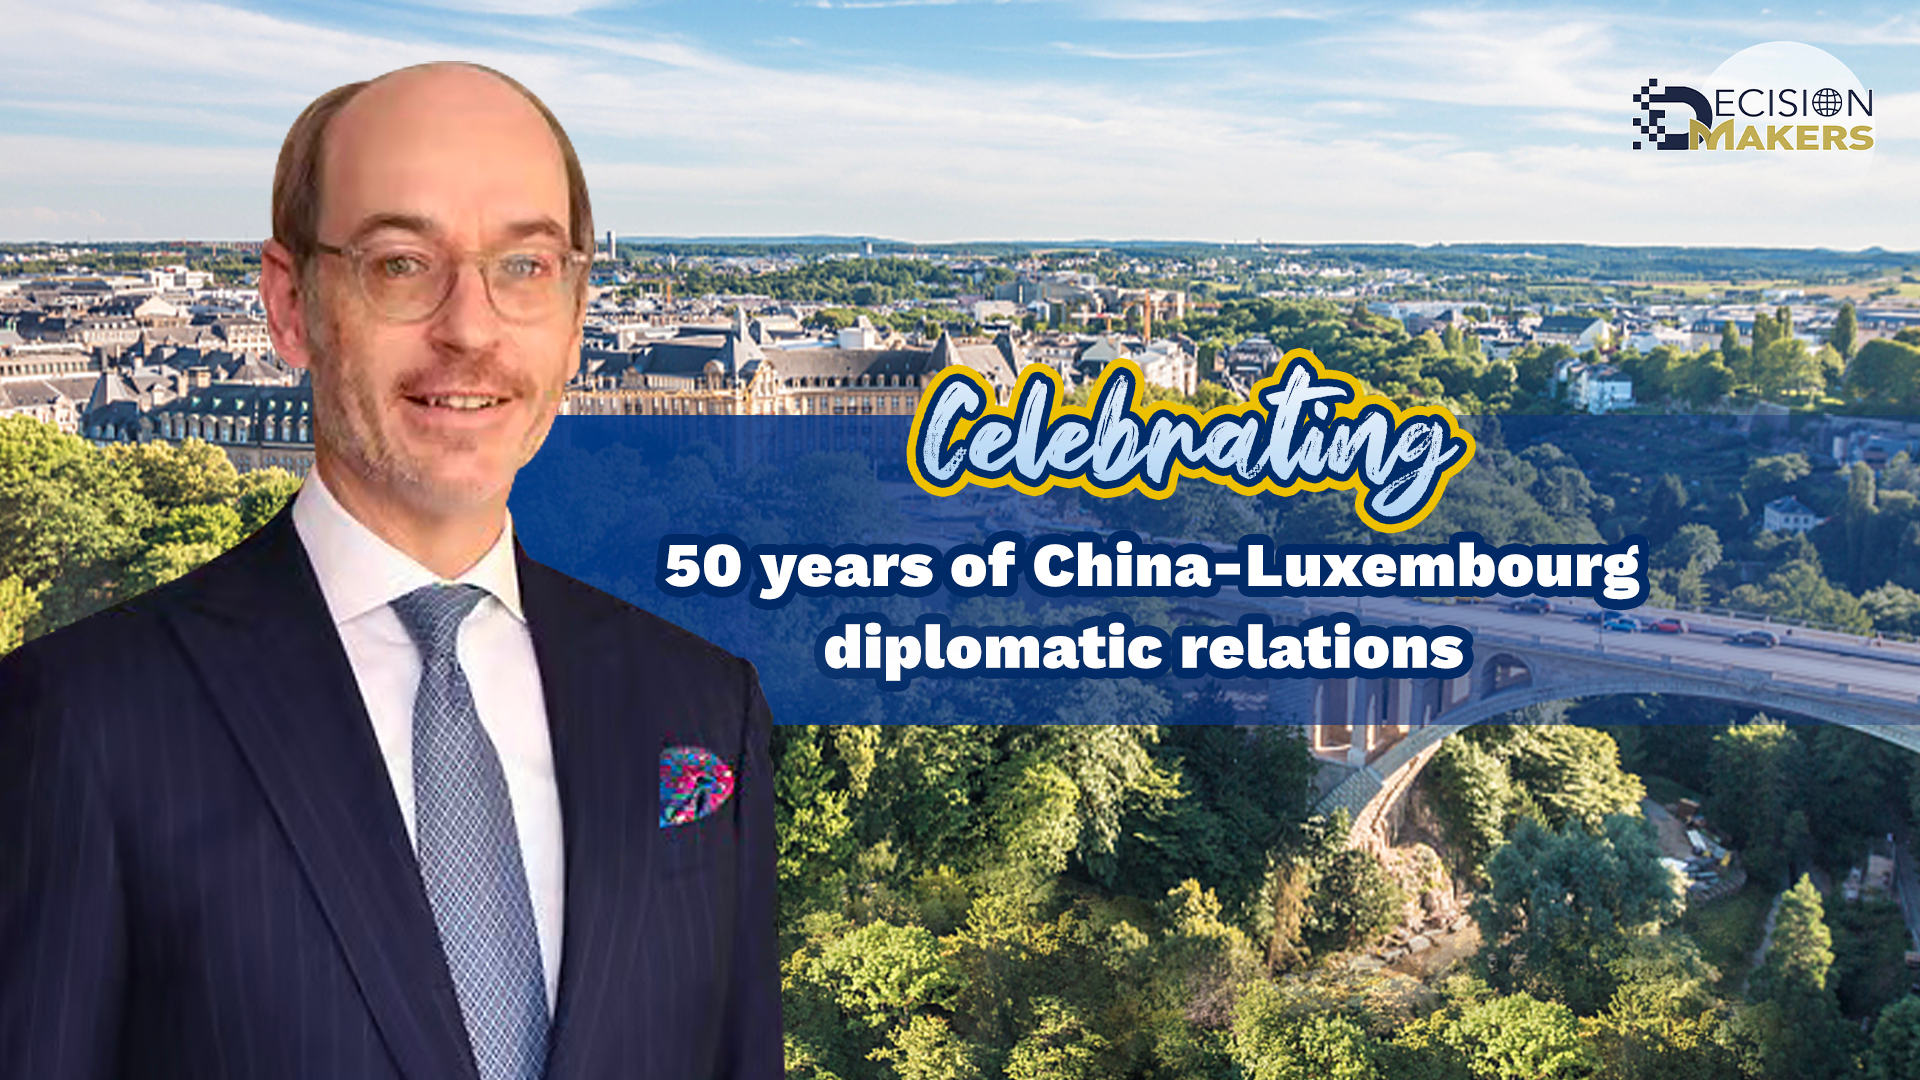 Celebrating 50 years of China-Luxembourg diplomatic relations